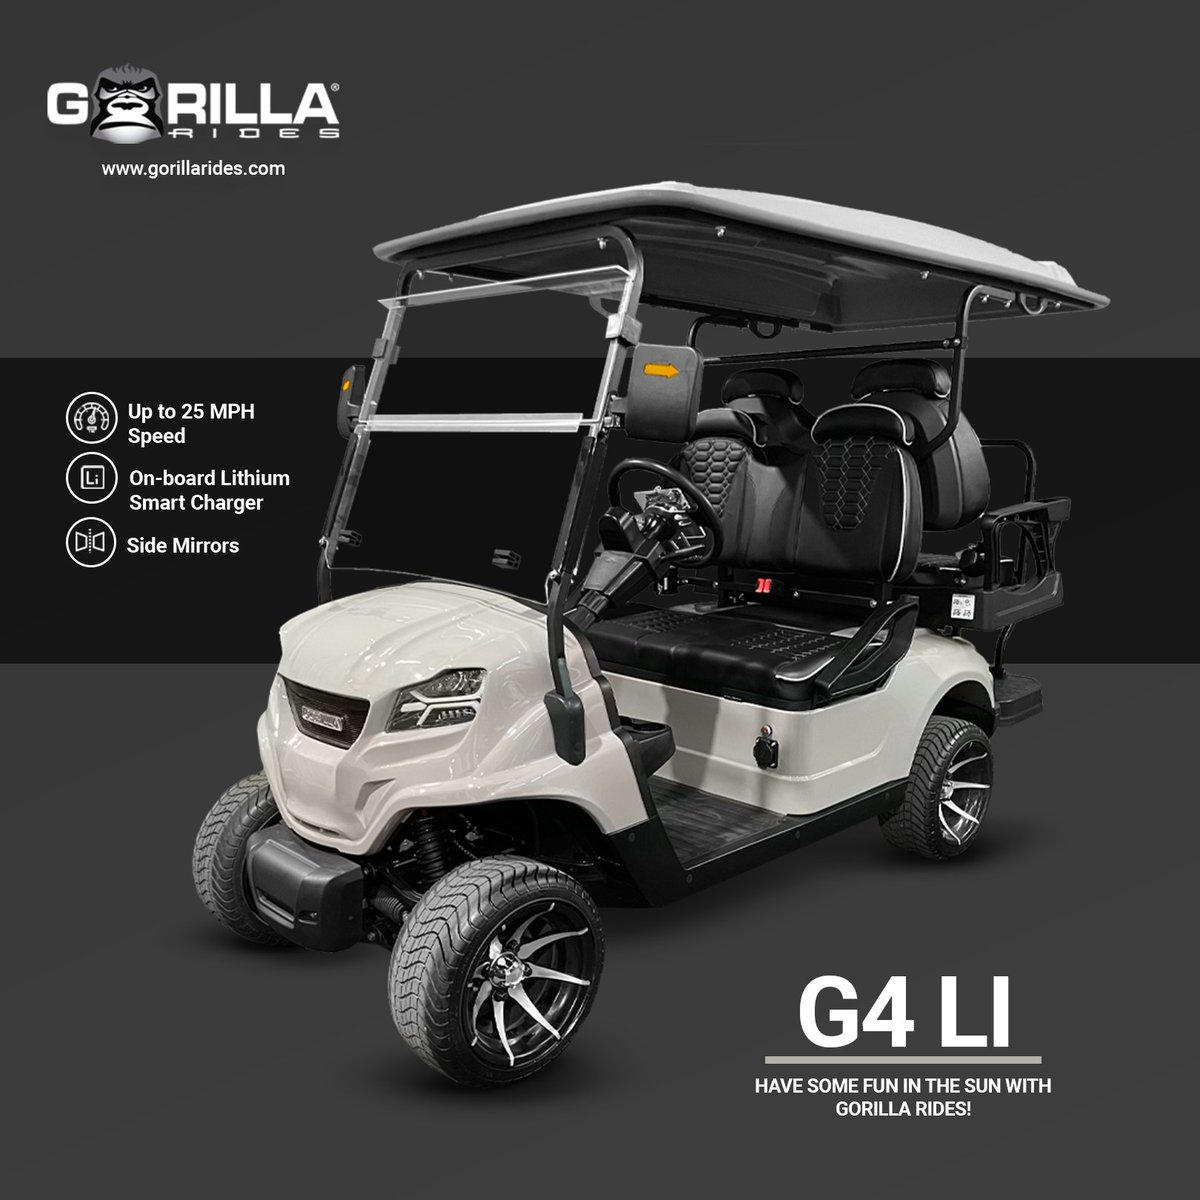 😎Hit the road with our latest member the NEW G4 LI, the perfect companion on the road.🌇

#GorillaRides #ComfortFirst #BetterThanTheRest #ElectricPower